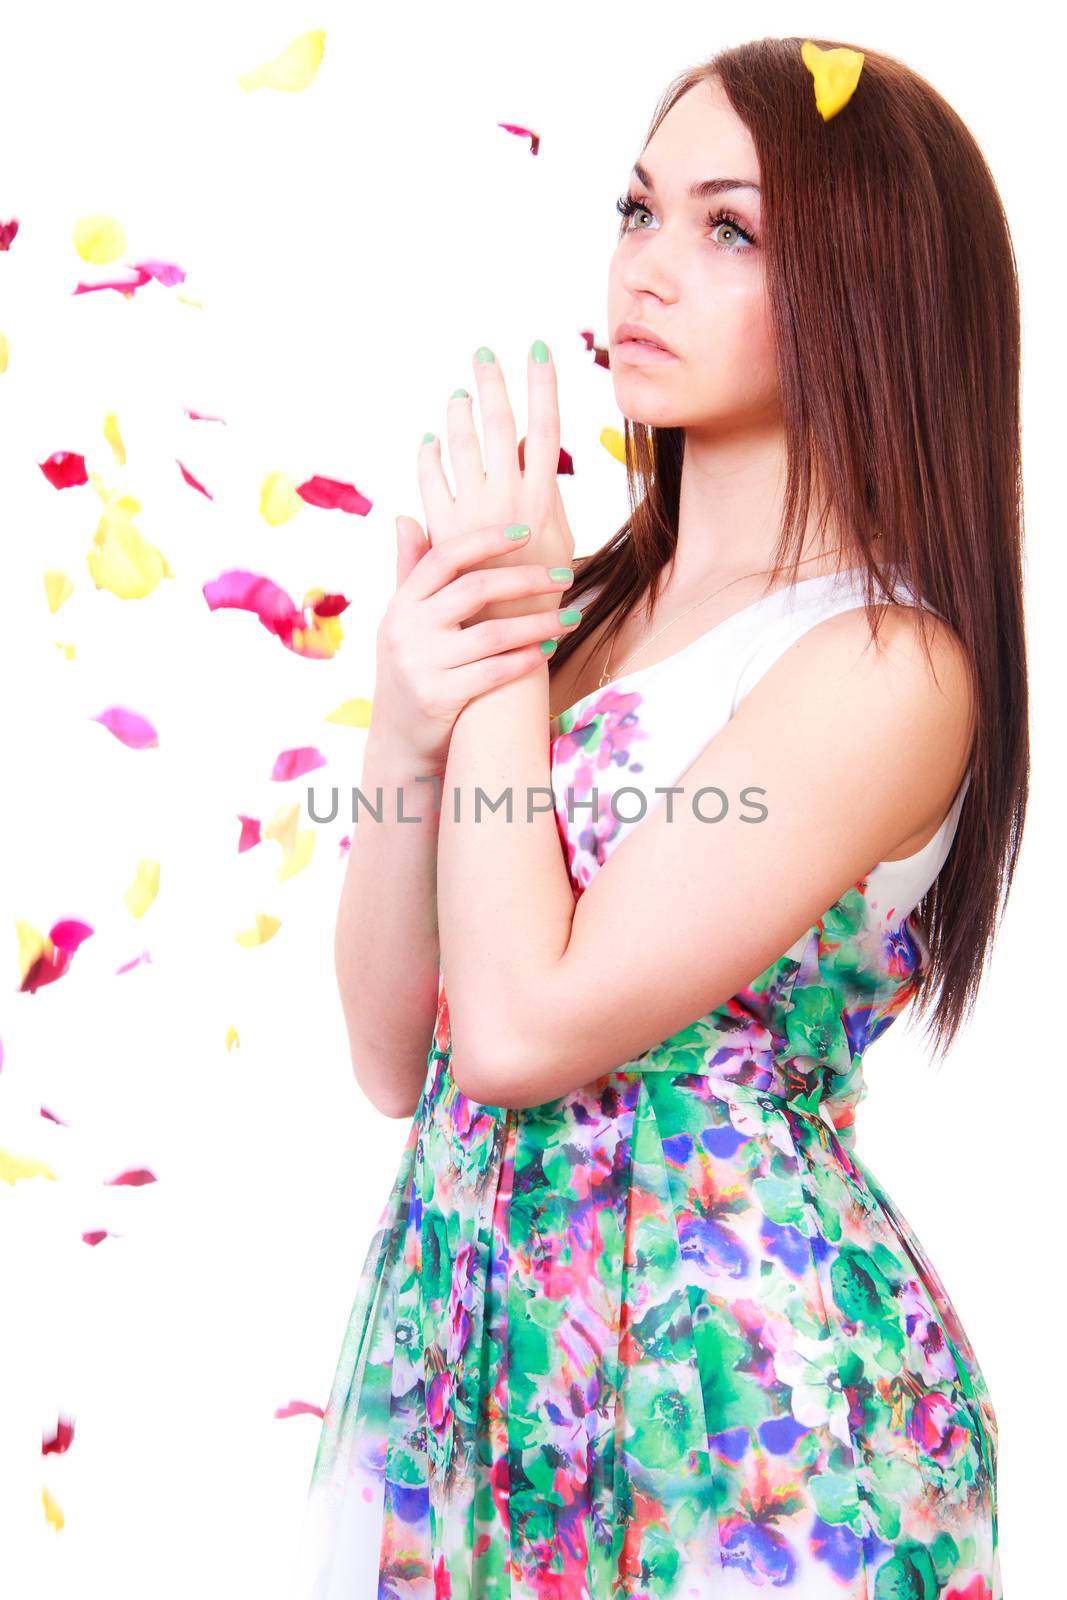 Beautiful young woman in a bright many-colored dress isolated over white background